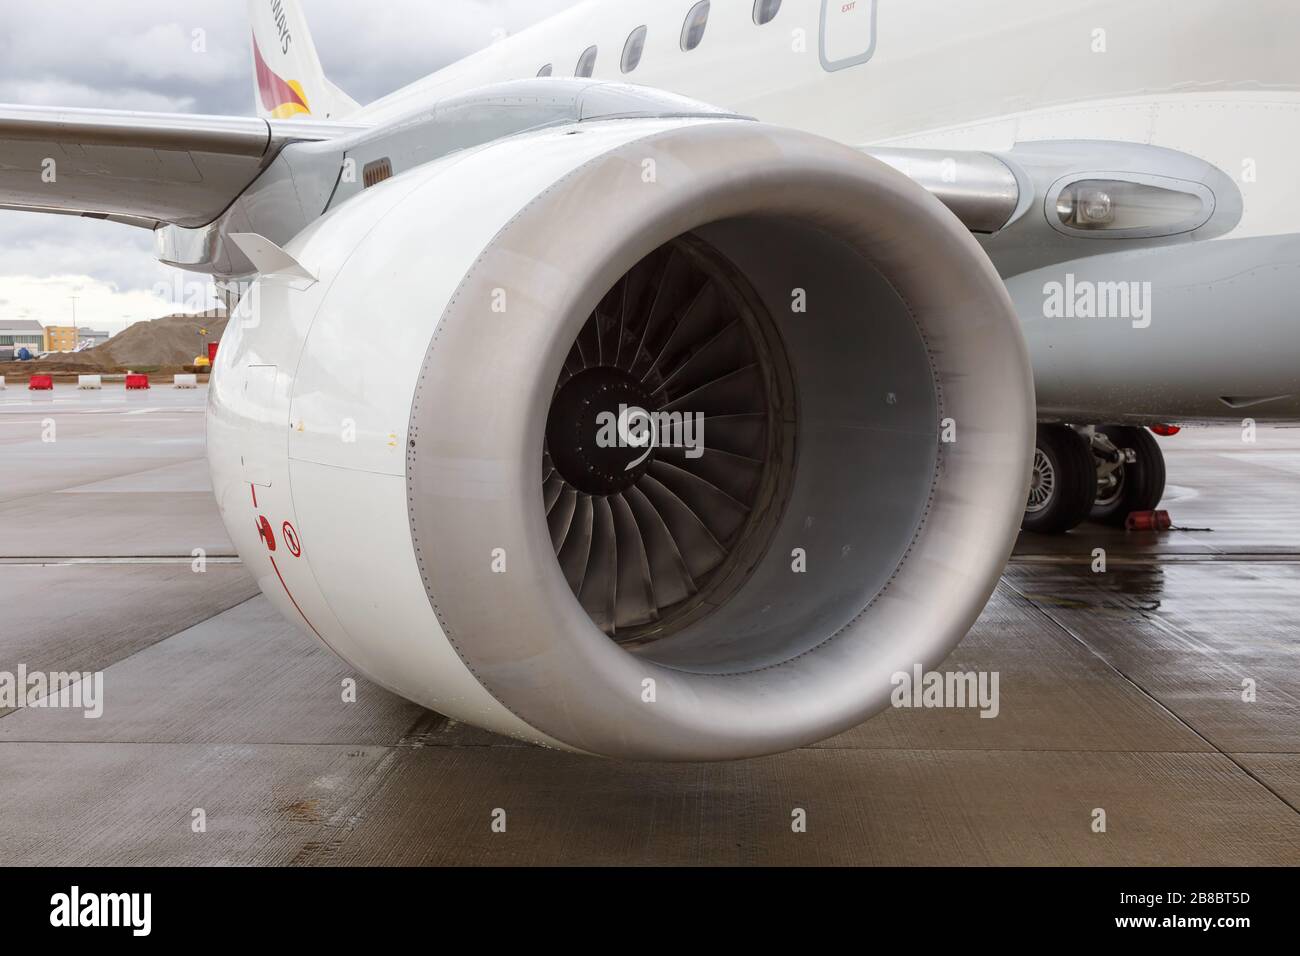 Cologne, Germany – November 2, 2019: Engine of a German Airways Embraer 190 airplane at Cologne Bonn airport (CGN) in Germany. Stock Photo